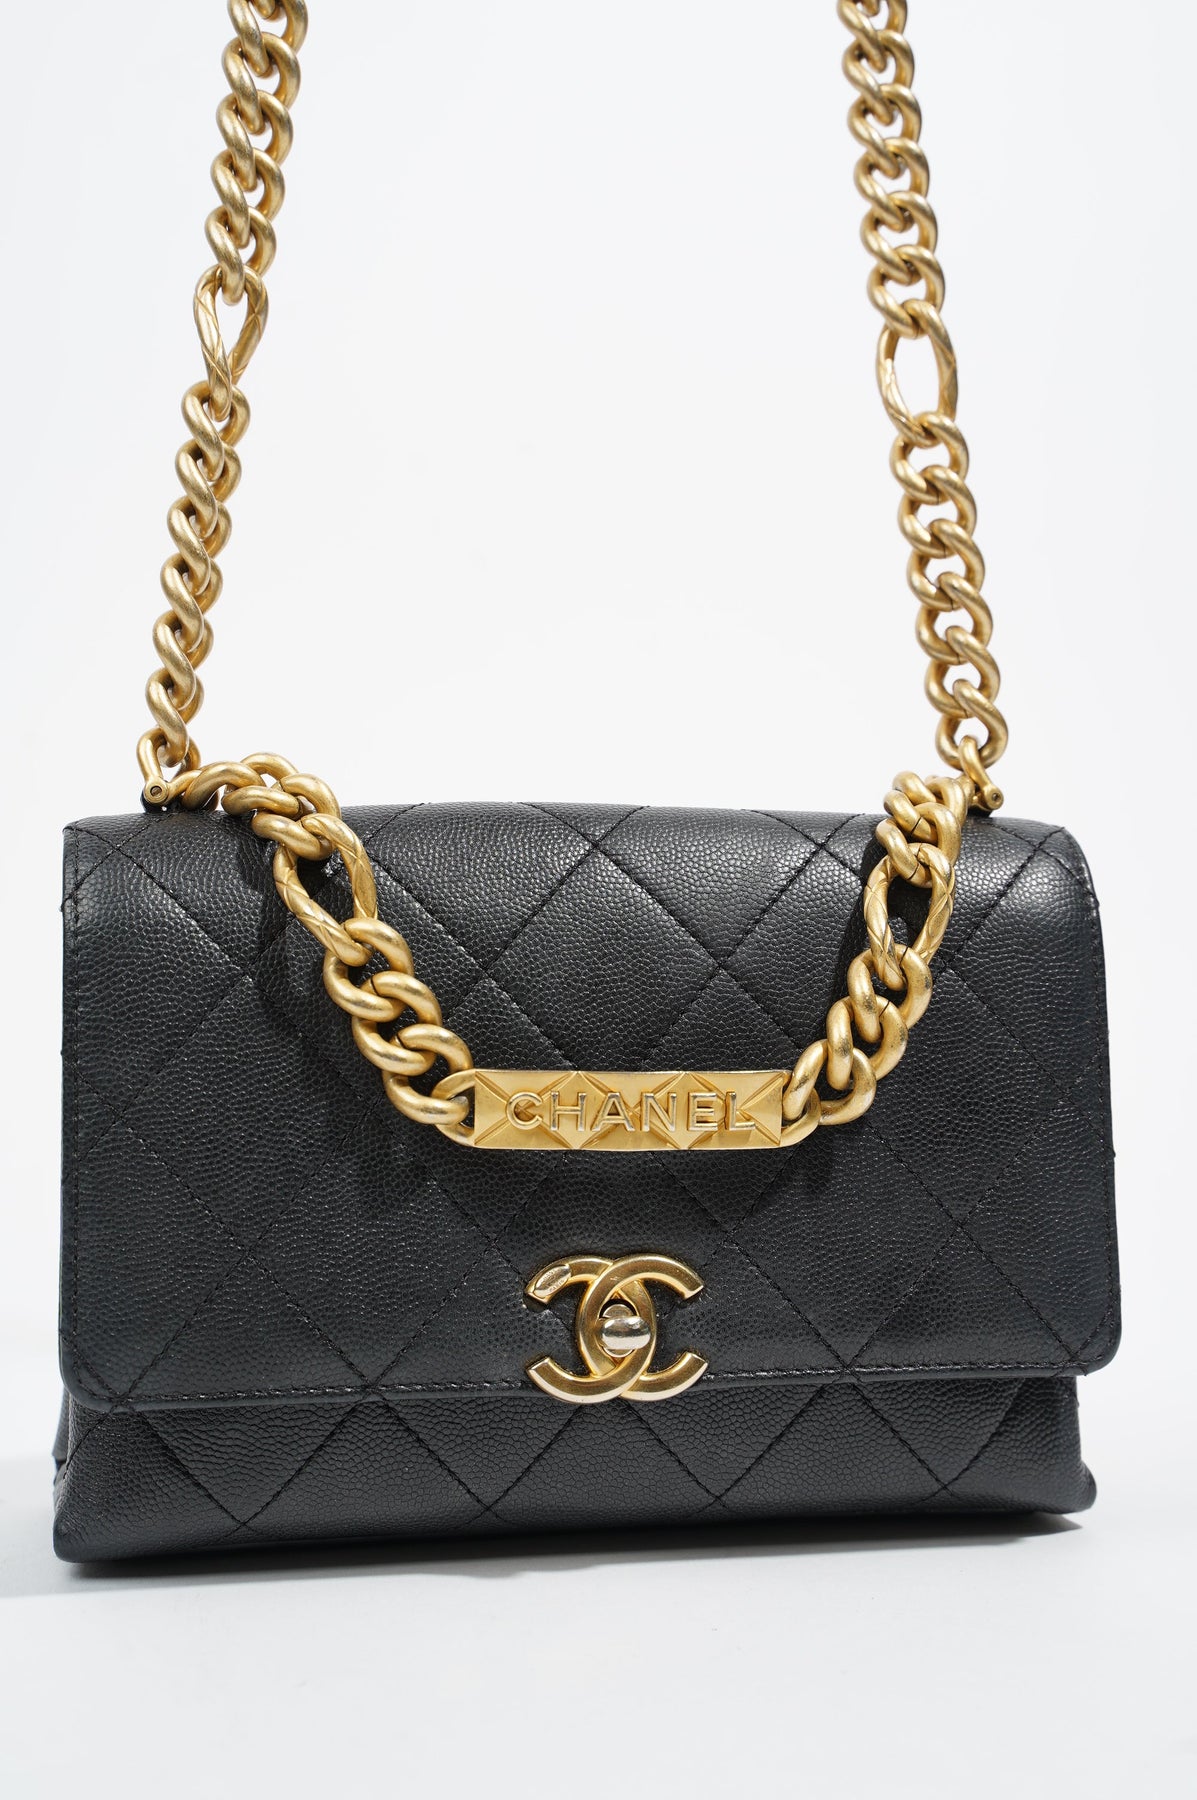 Chanel Camellia Mini Pouch, Calfskin, Anthracite SHW - Laulay Luxury